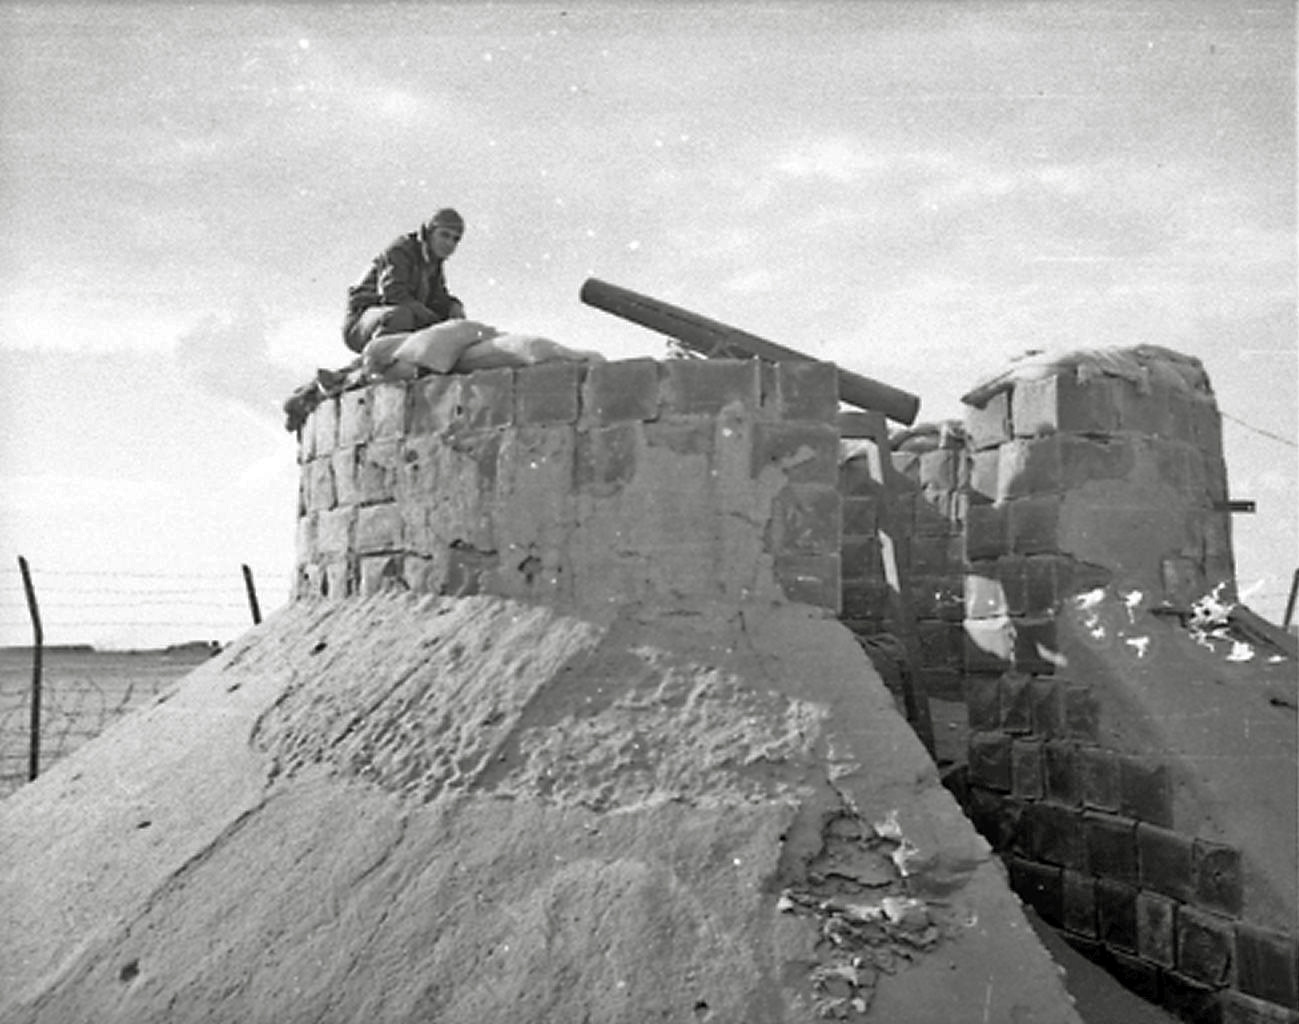 From a collection of WW2 negatives I recently acquired. Looking at the scenery, I am thinking this is somewhere in North Africa.